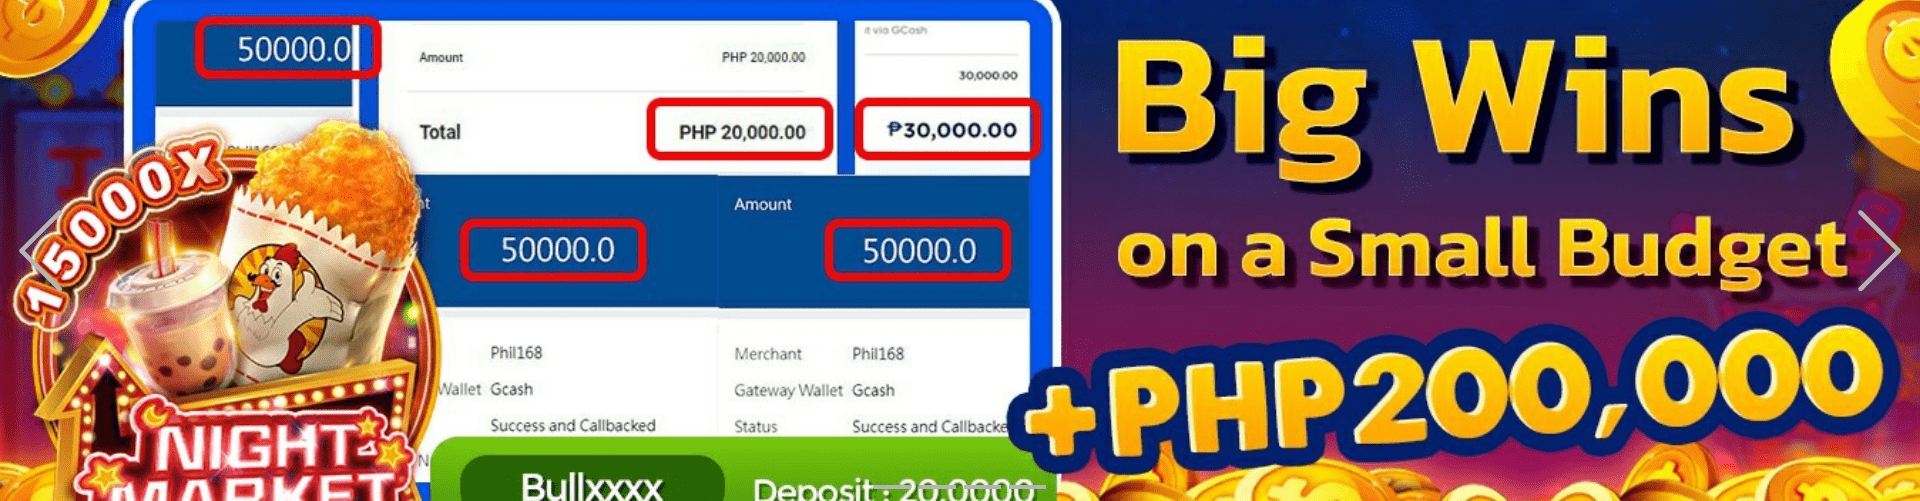 PHIL168-big wins in a small budget up to P200,000